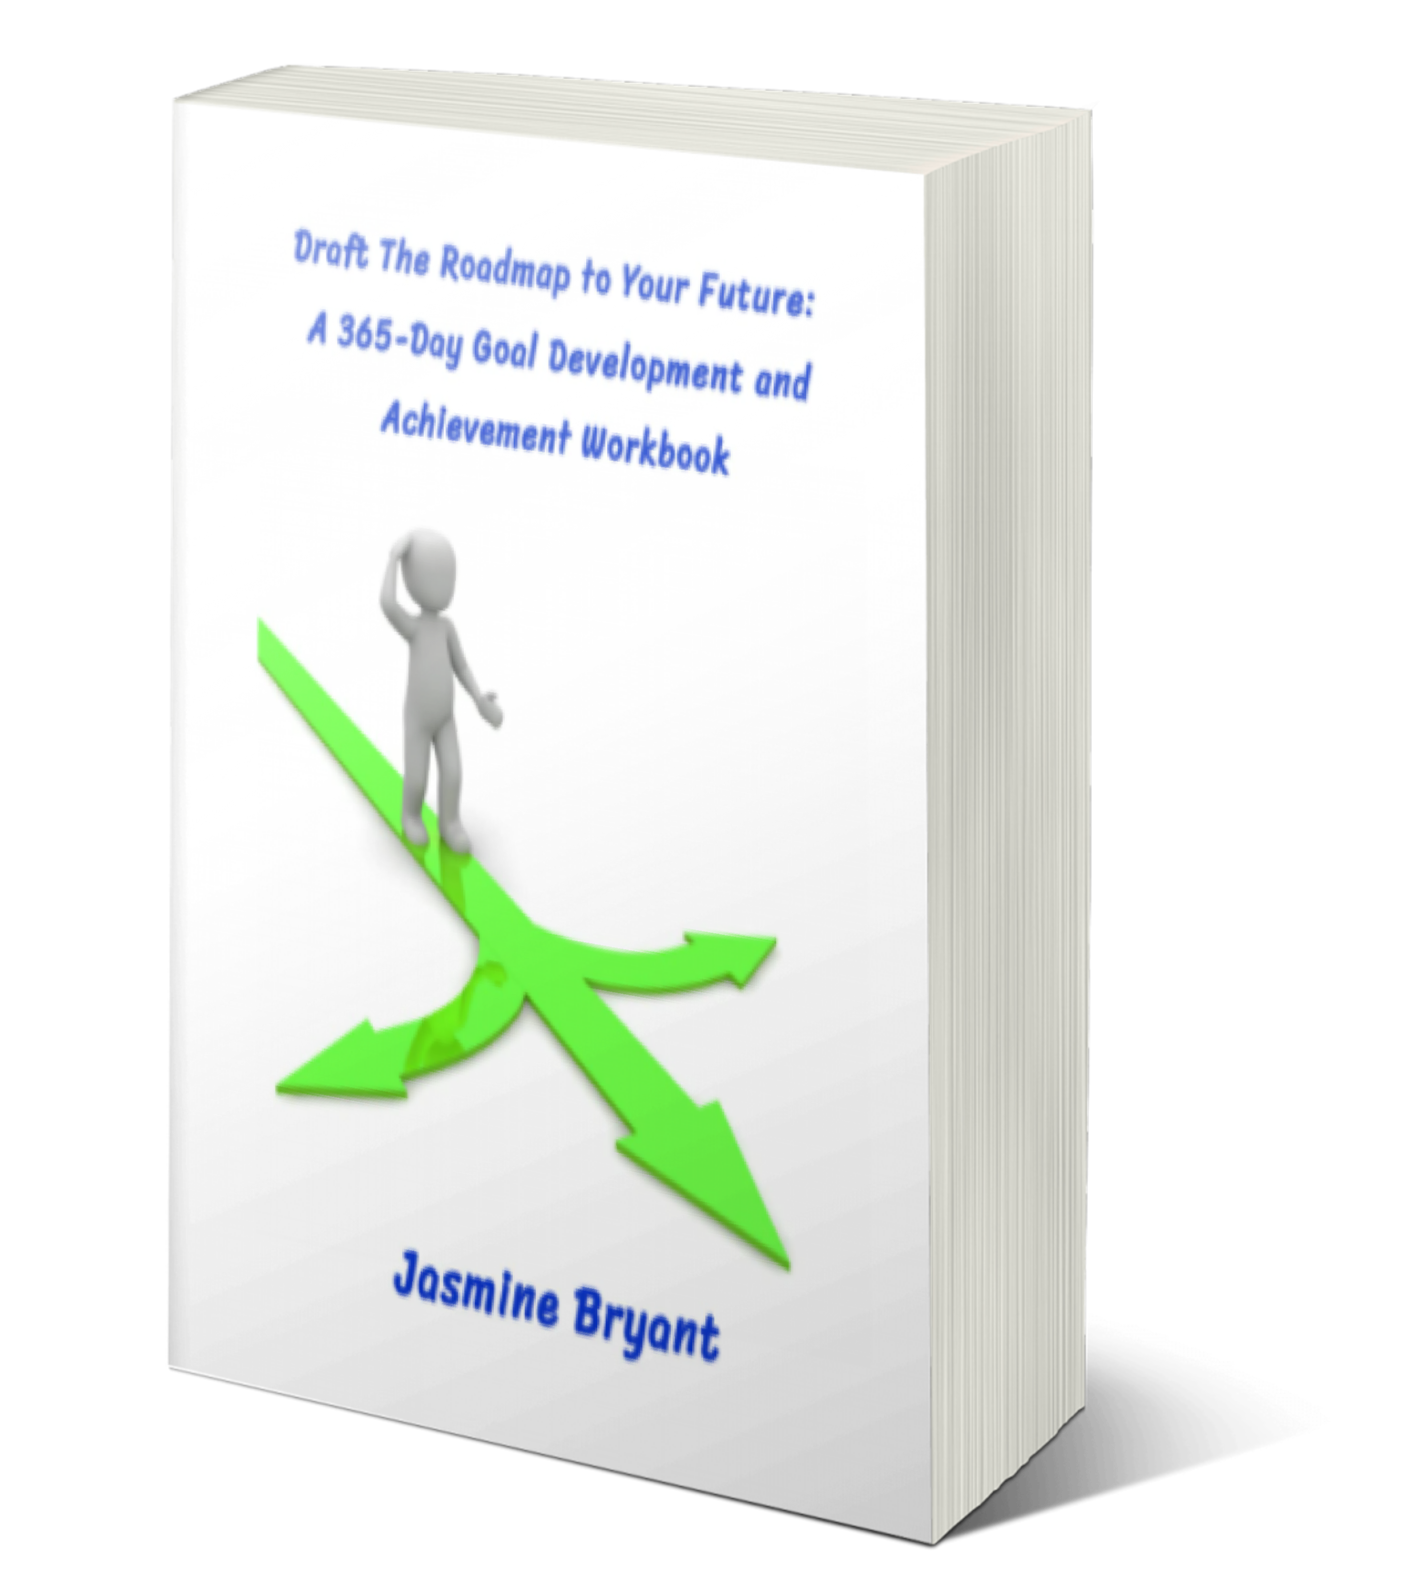 Draft the Roadmap to Your Future: A 365-Day Goal Development and Achievement Workbook